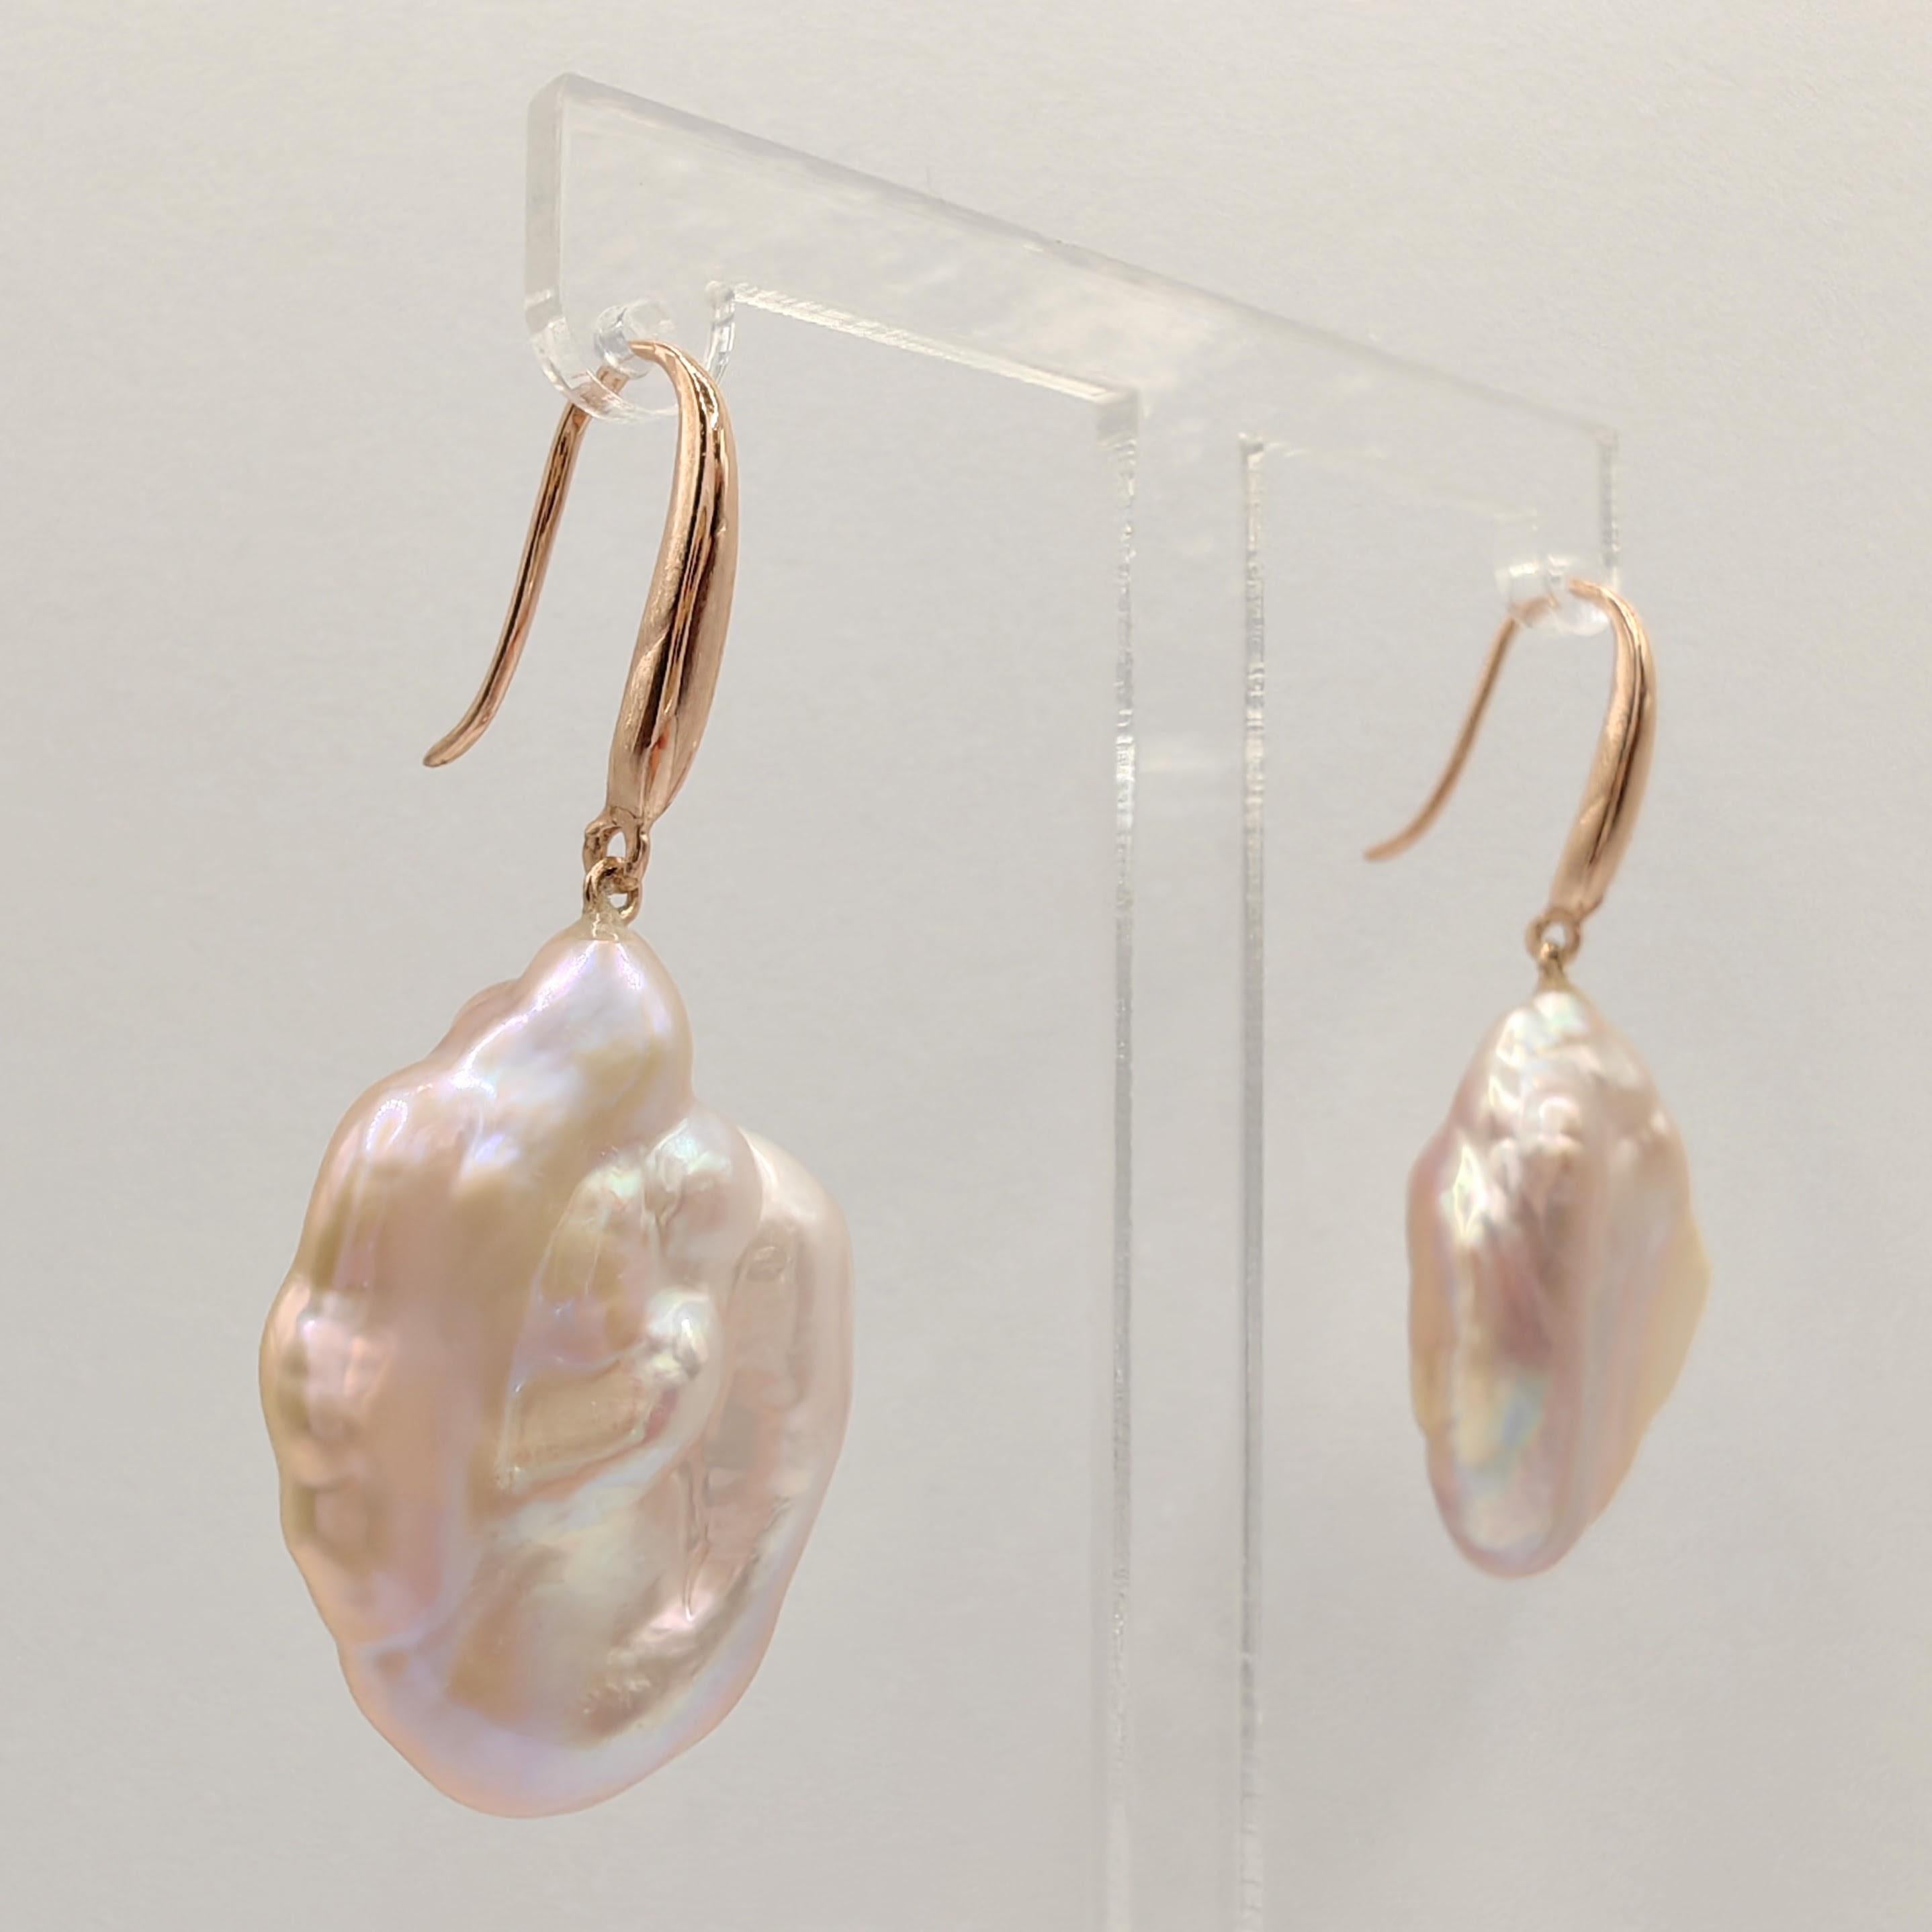 Uncut Pink-peach Keshi Pearl Dangling Drop Earrings With 18K Rose Gold French Hooks For Sale